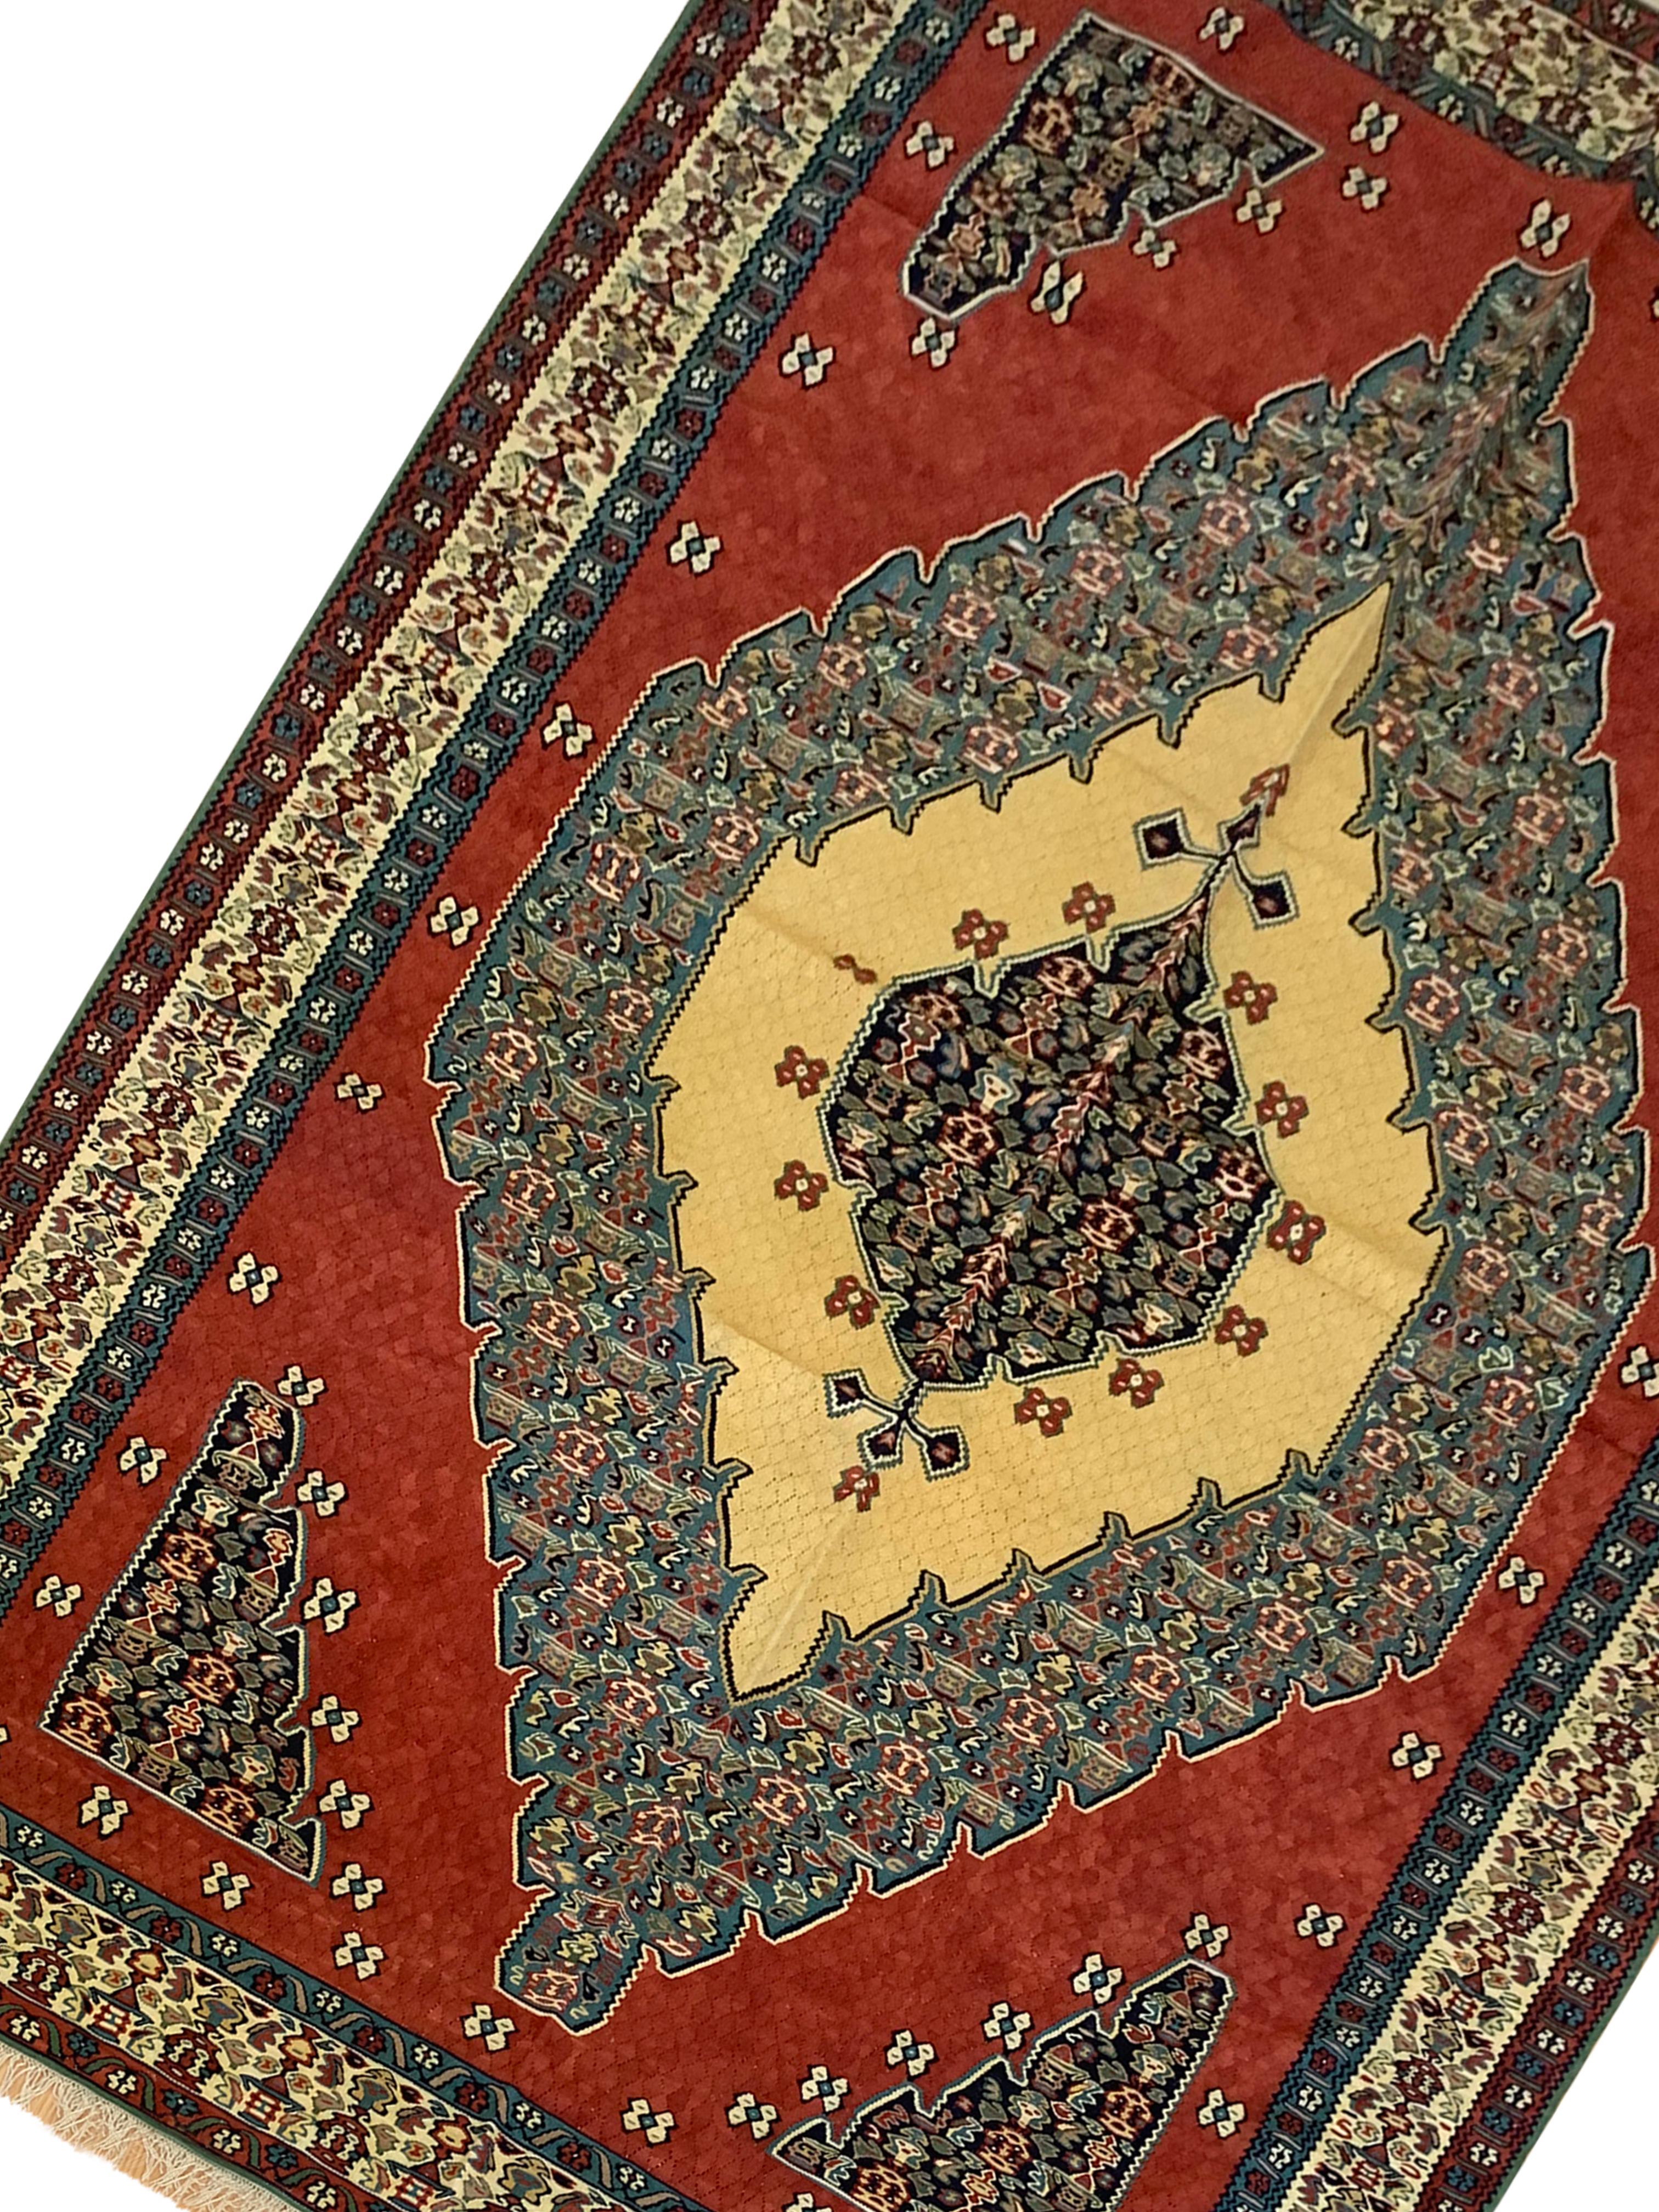 This beautiful flatwoven area rug is a Kurdish kilim woven in the early 2000s, circa 2010. Constructed with only the finest organic materials. The design features a bold red background with a large decorative medallion woven in accents of green and